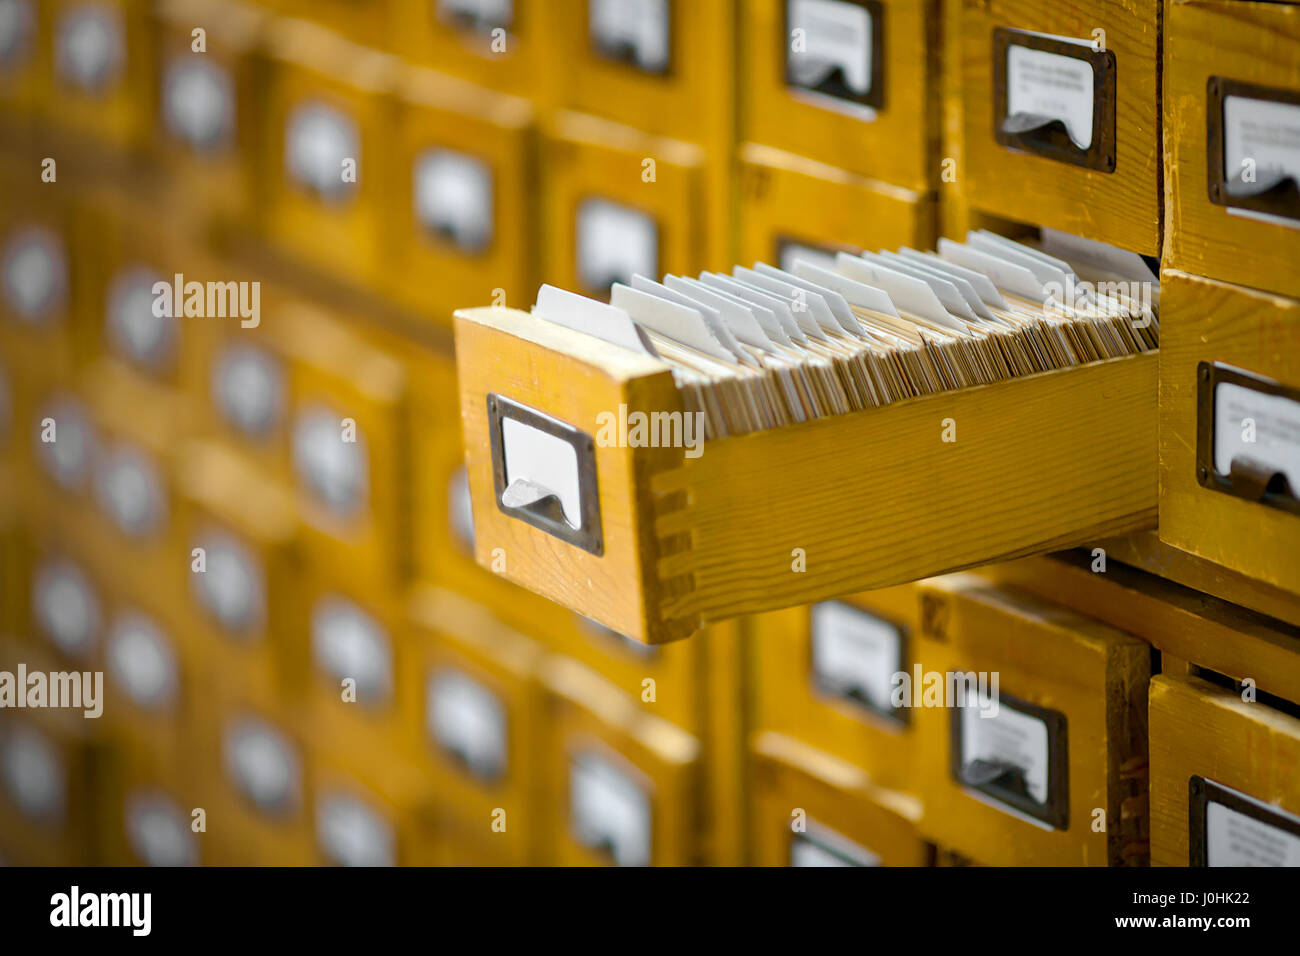 yellow library or archive reference catalogue with opened card drawer. Stock Photo